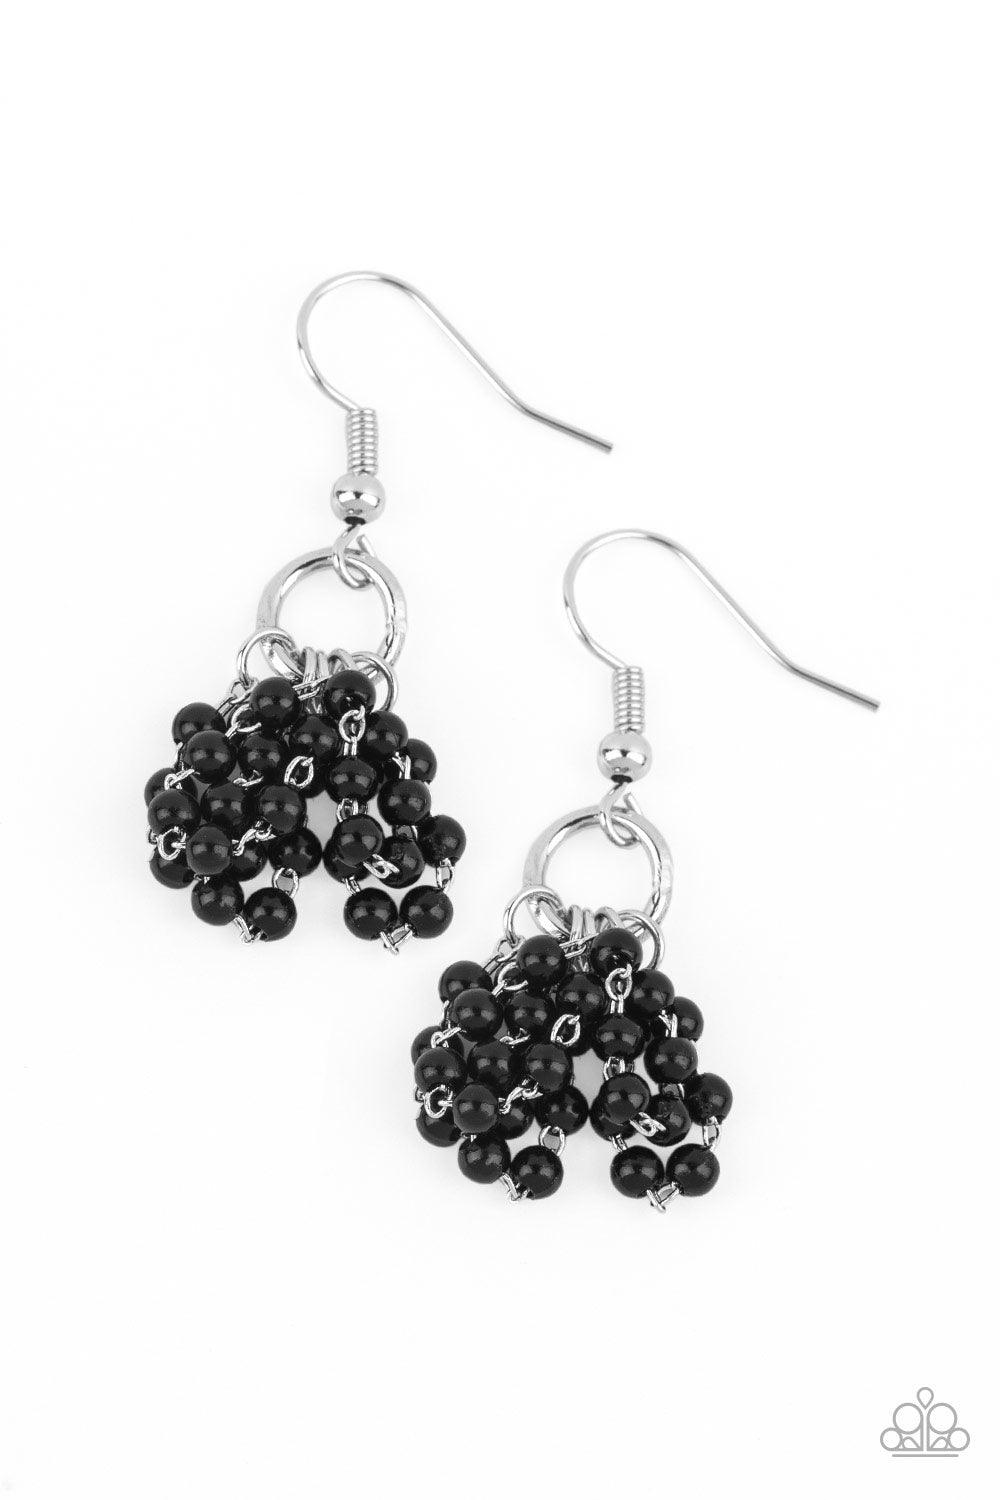 Paparazzi Accessories Iconic Impression Silver Earrings - Jewelry by Bretta